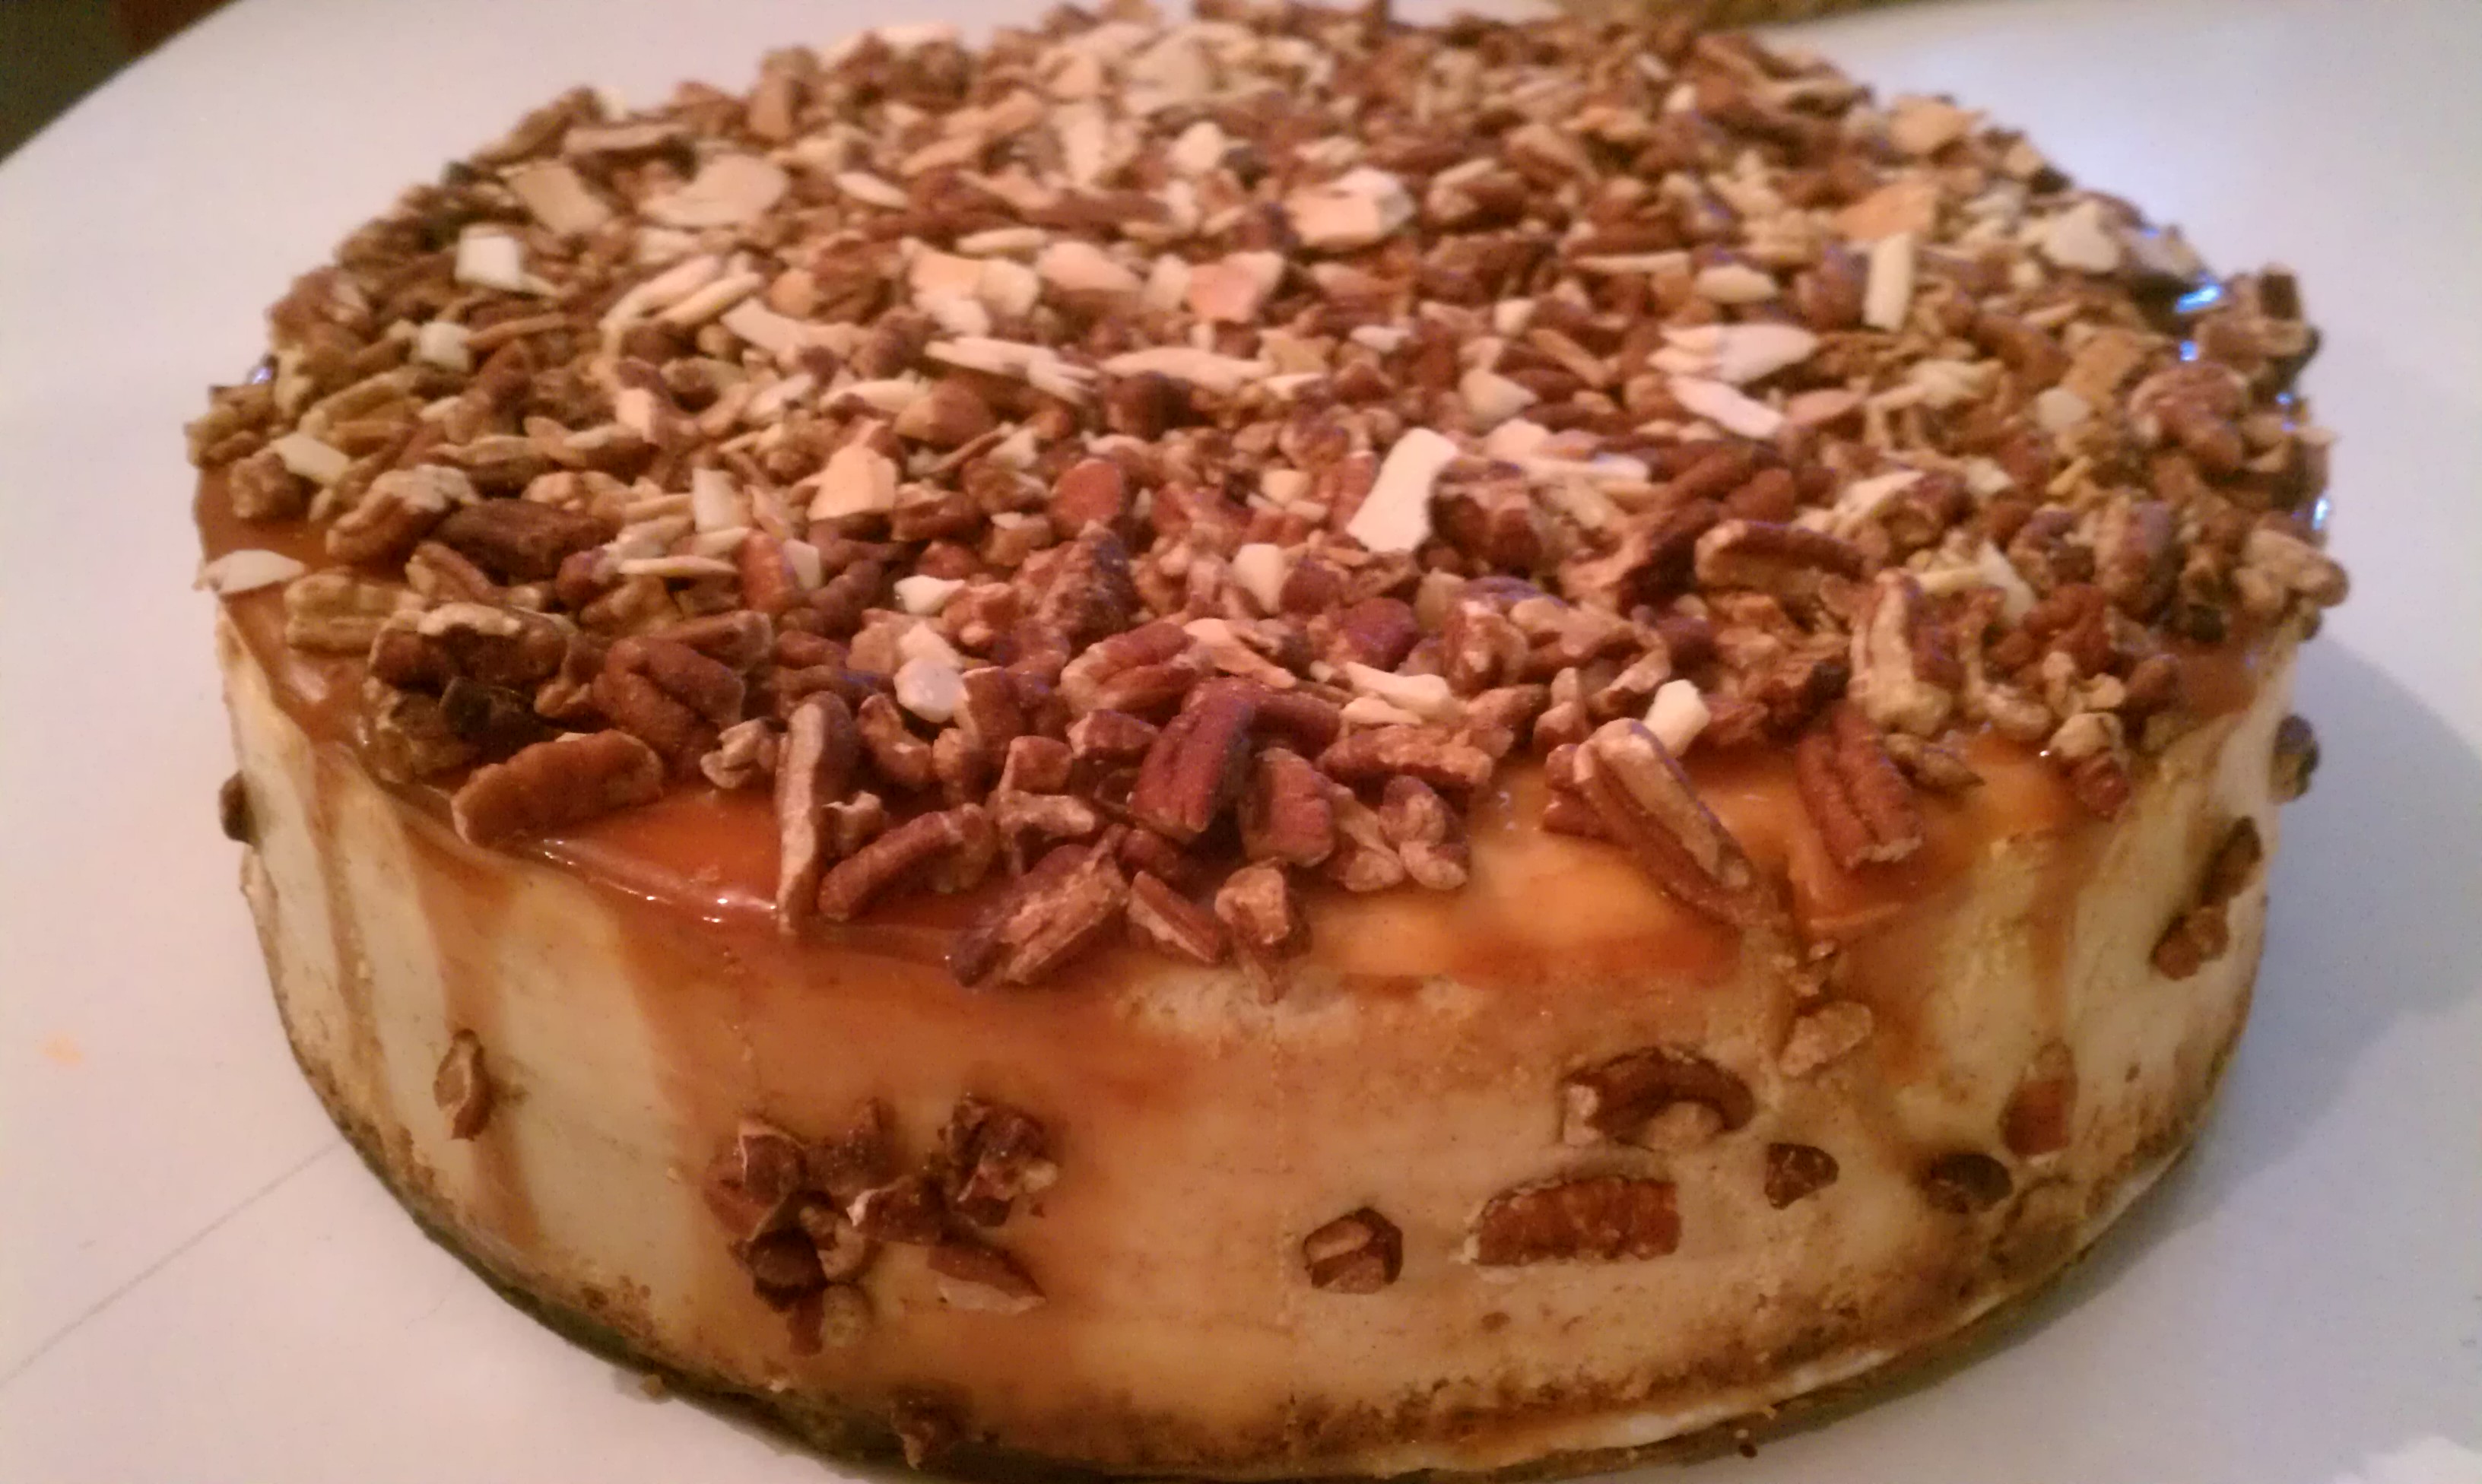 Cheesecake - Praline Pecan with almonds